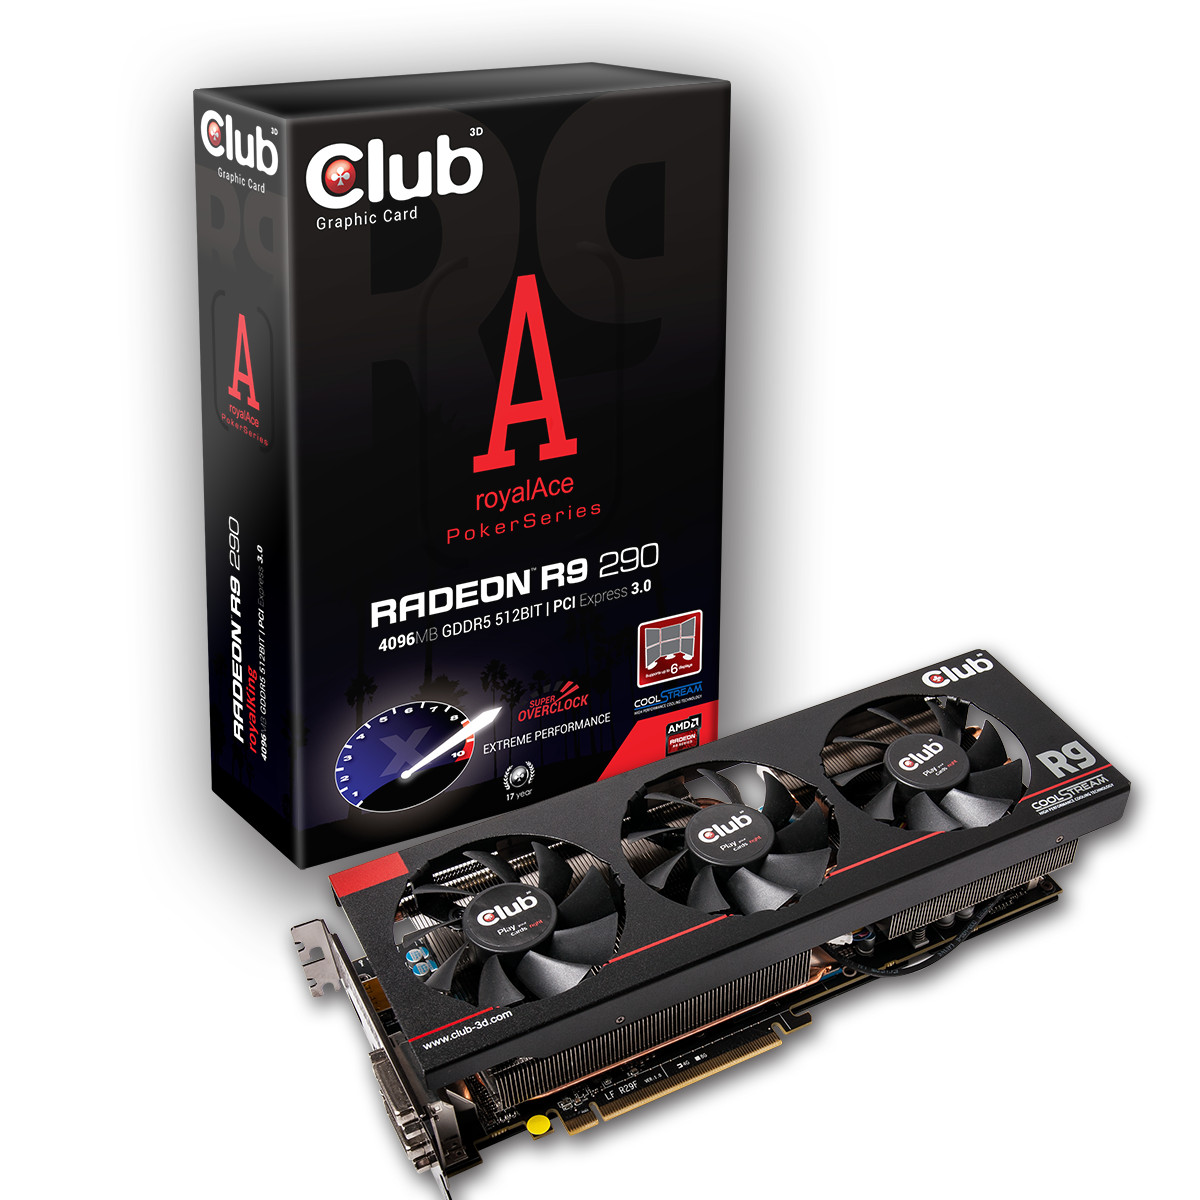 Club 3d Releases Radeon R9 290x And R9 290 Royalace Graphics Cards